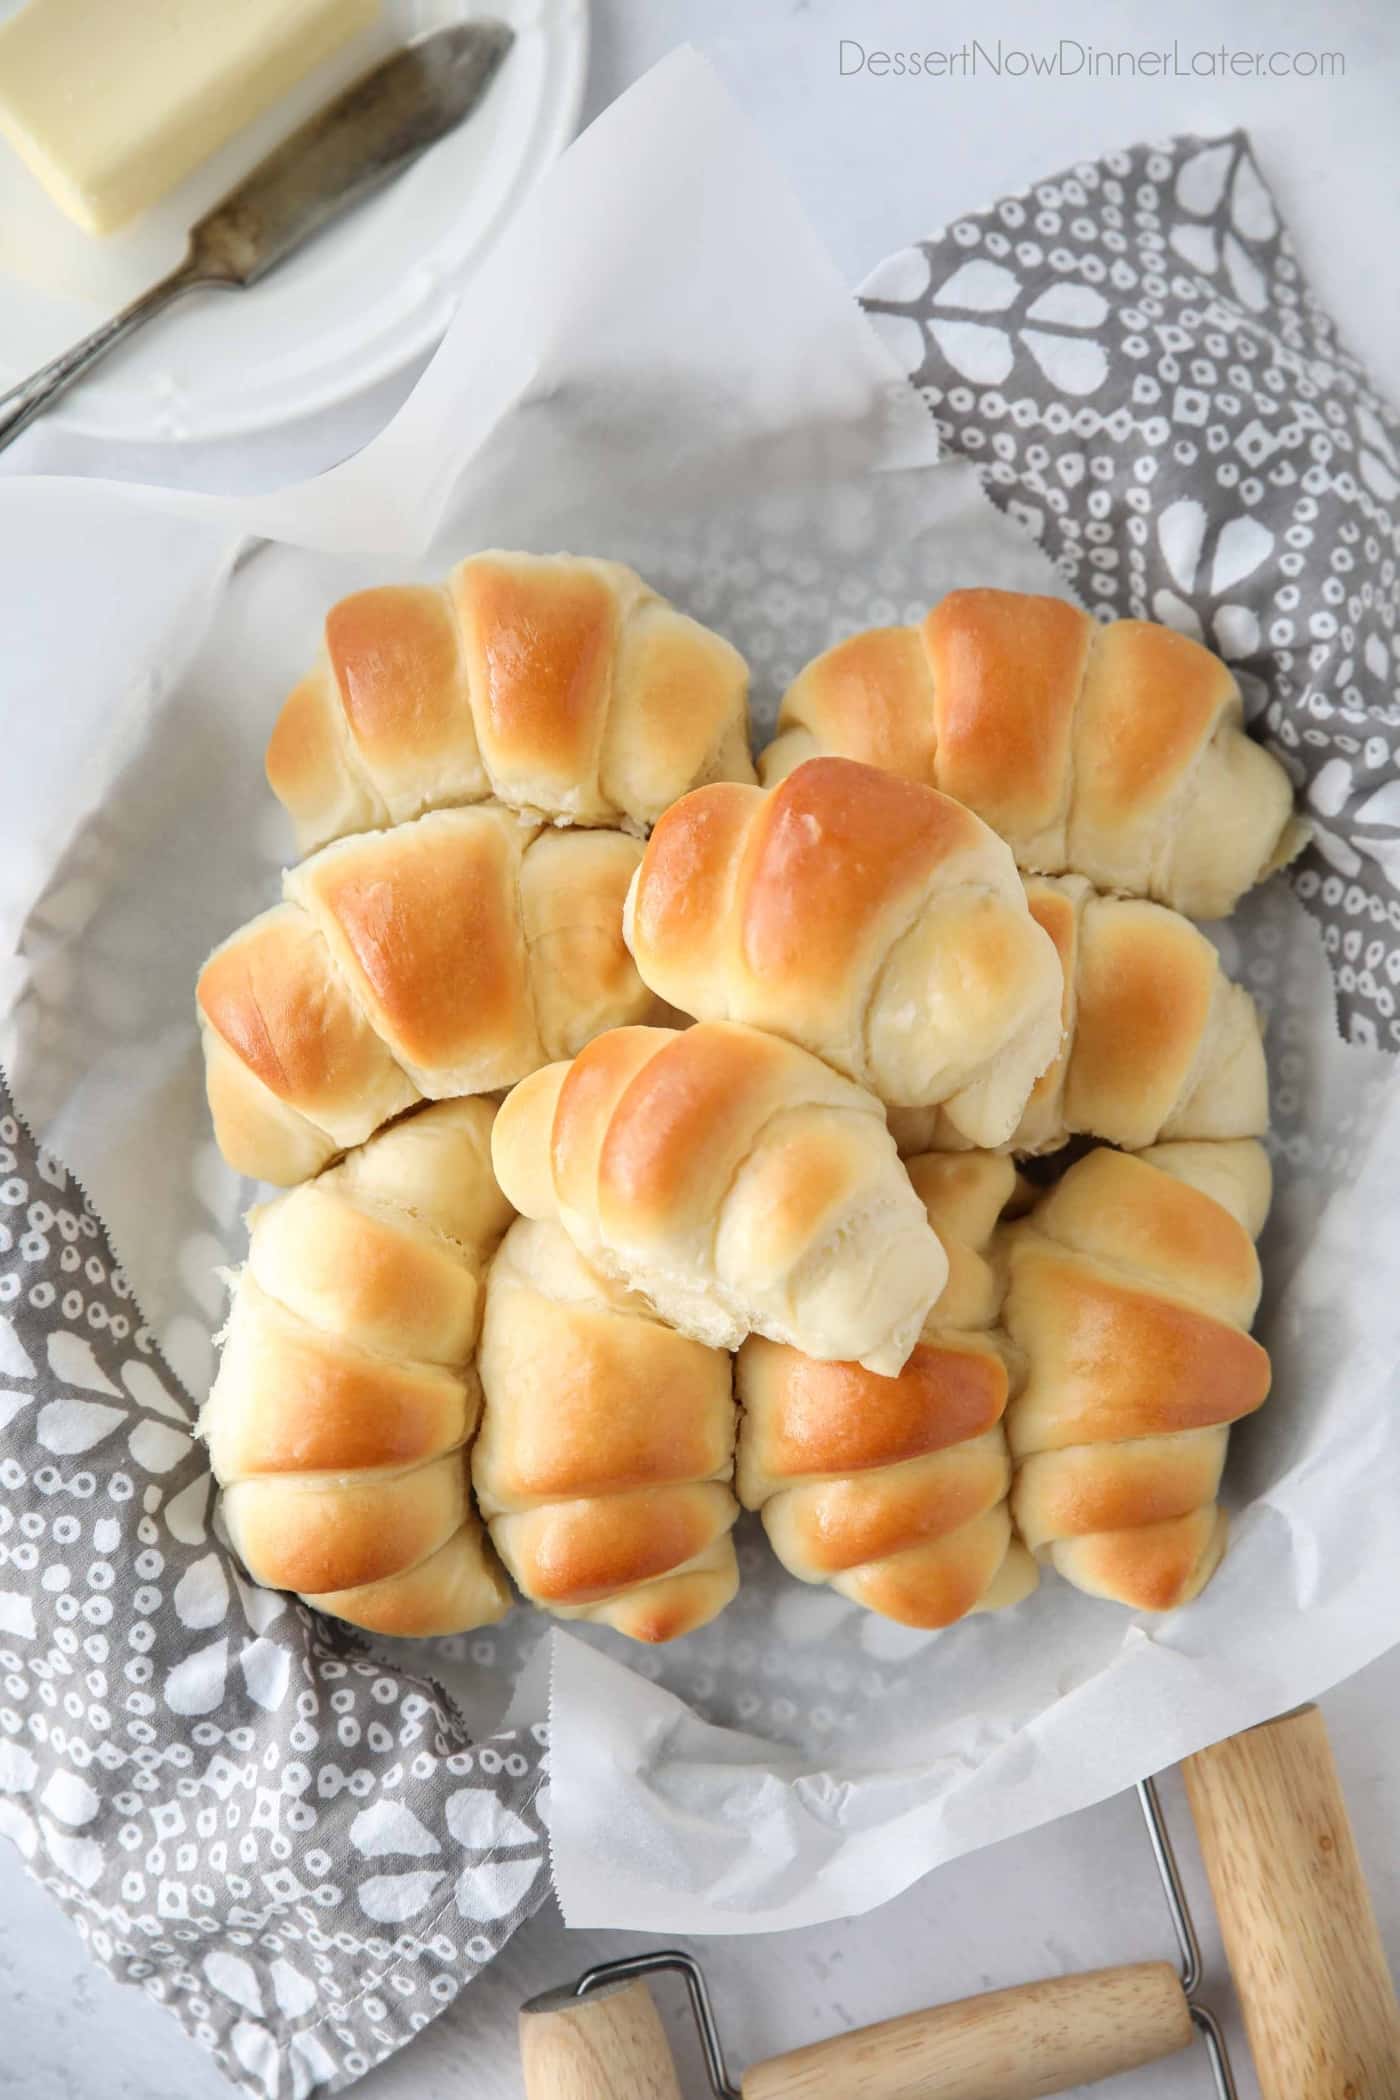 Crescent rolls can be so much more